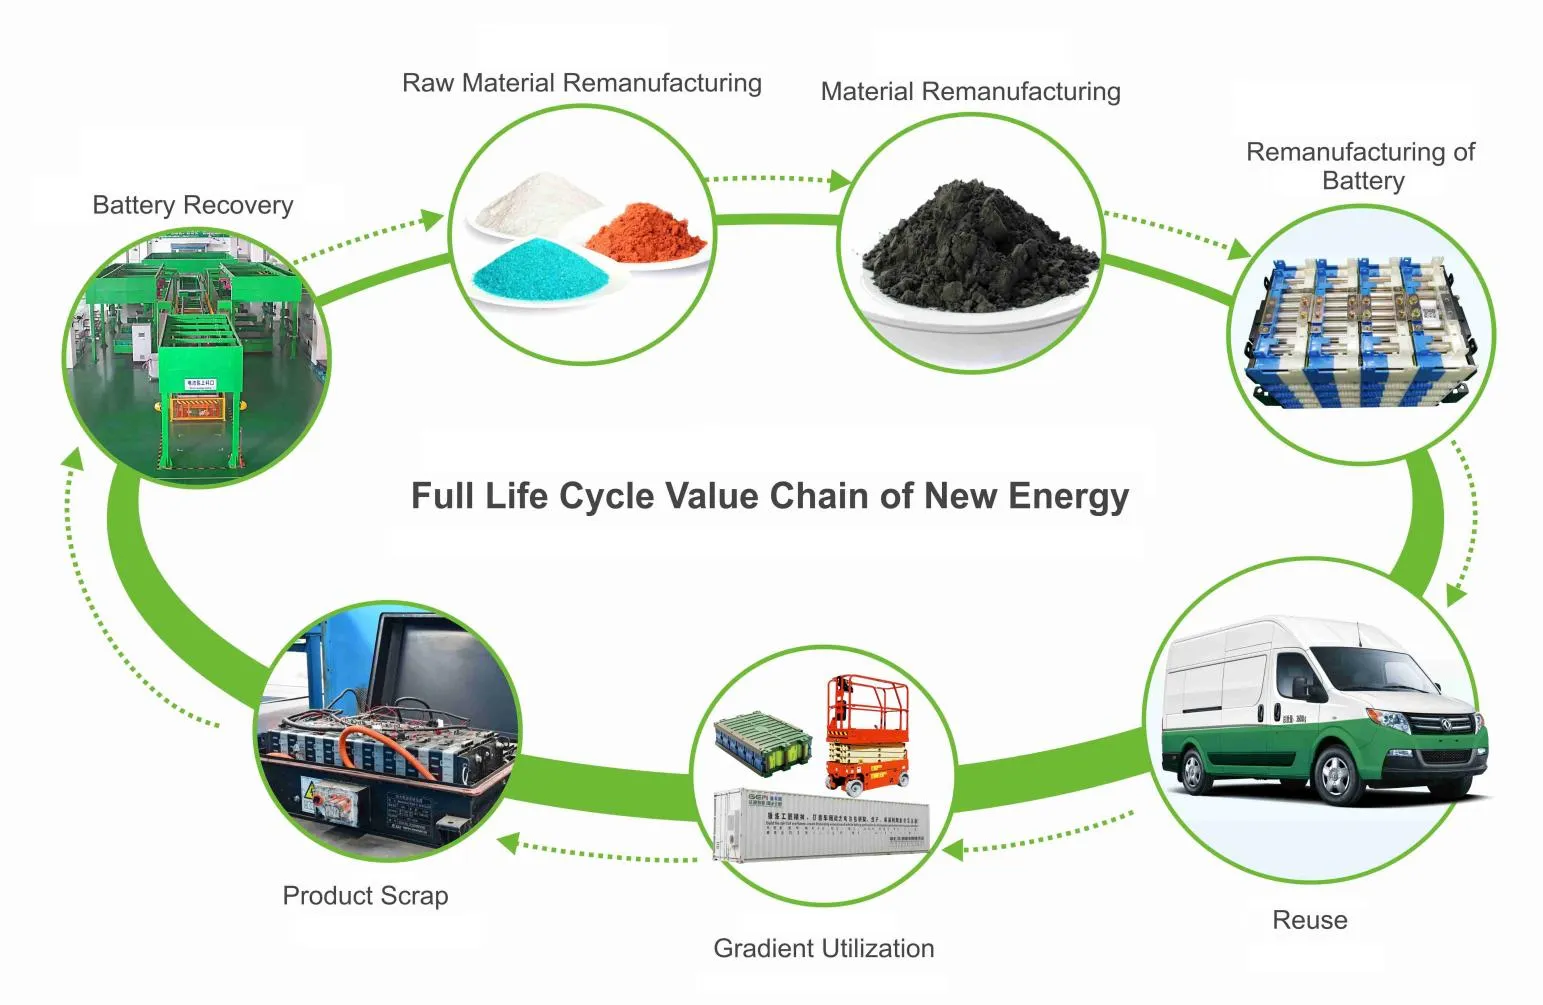 II. Lithium Battery Recycling Line: A Holistic Expedition into Sustainable Praxis